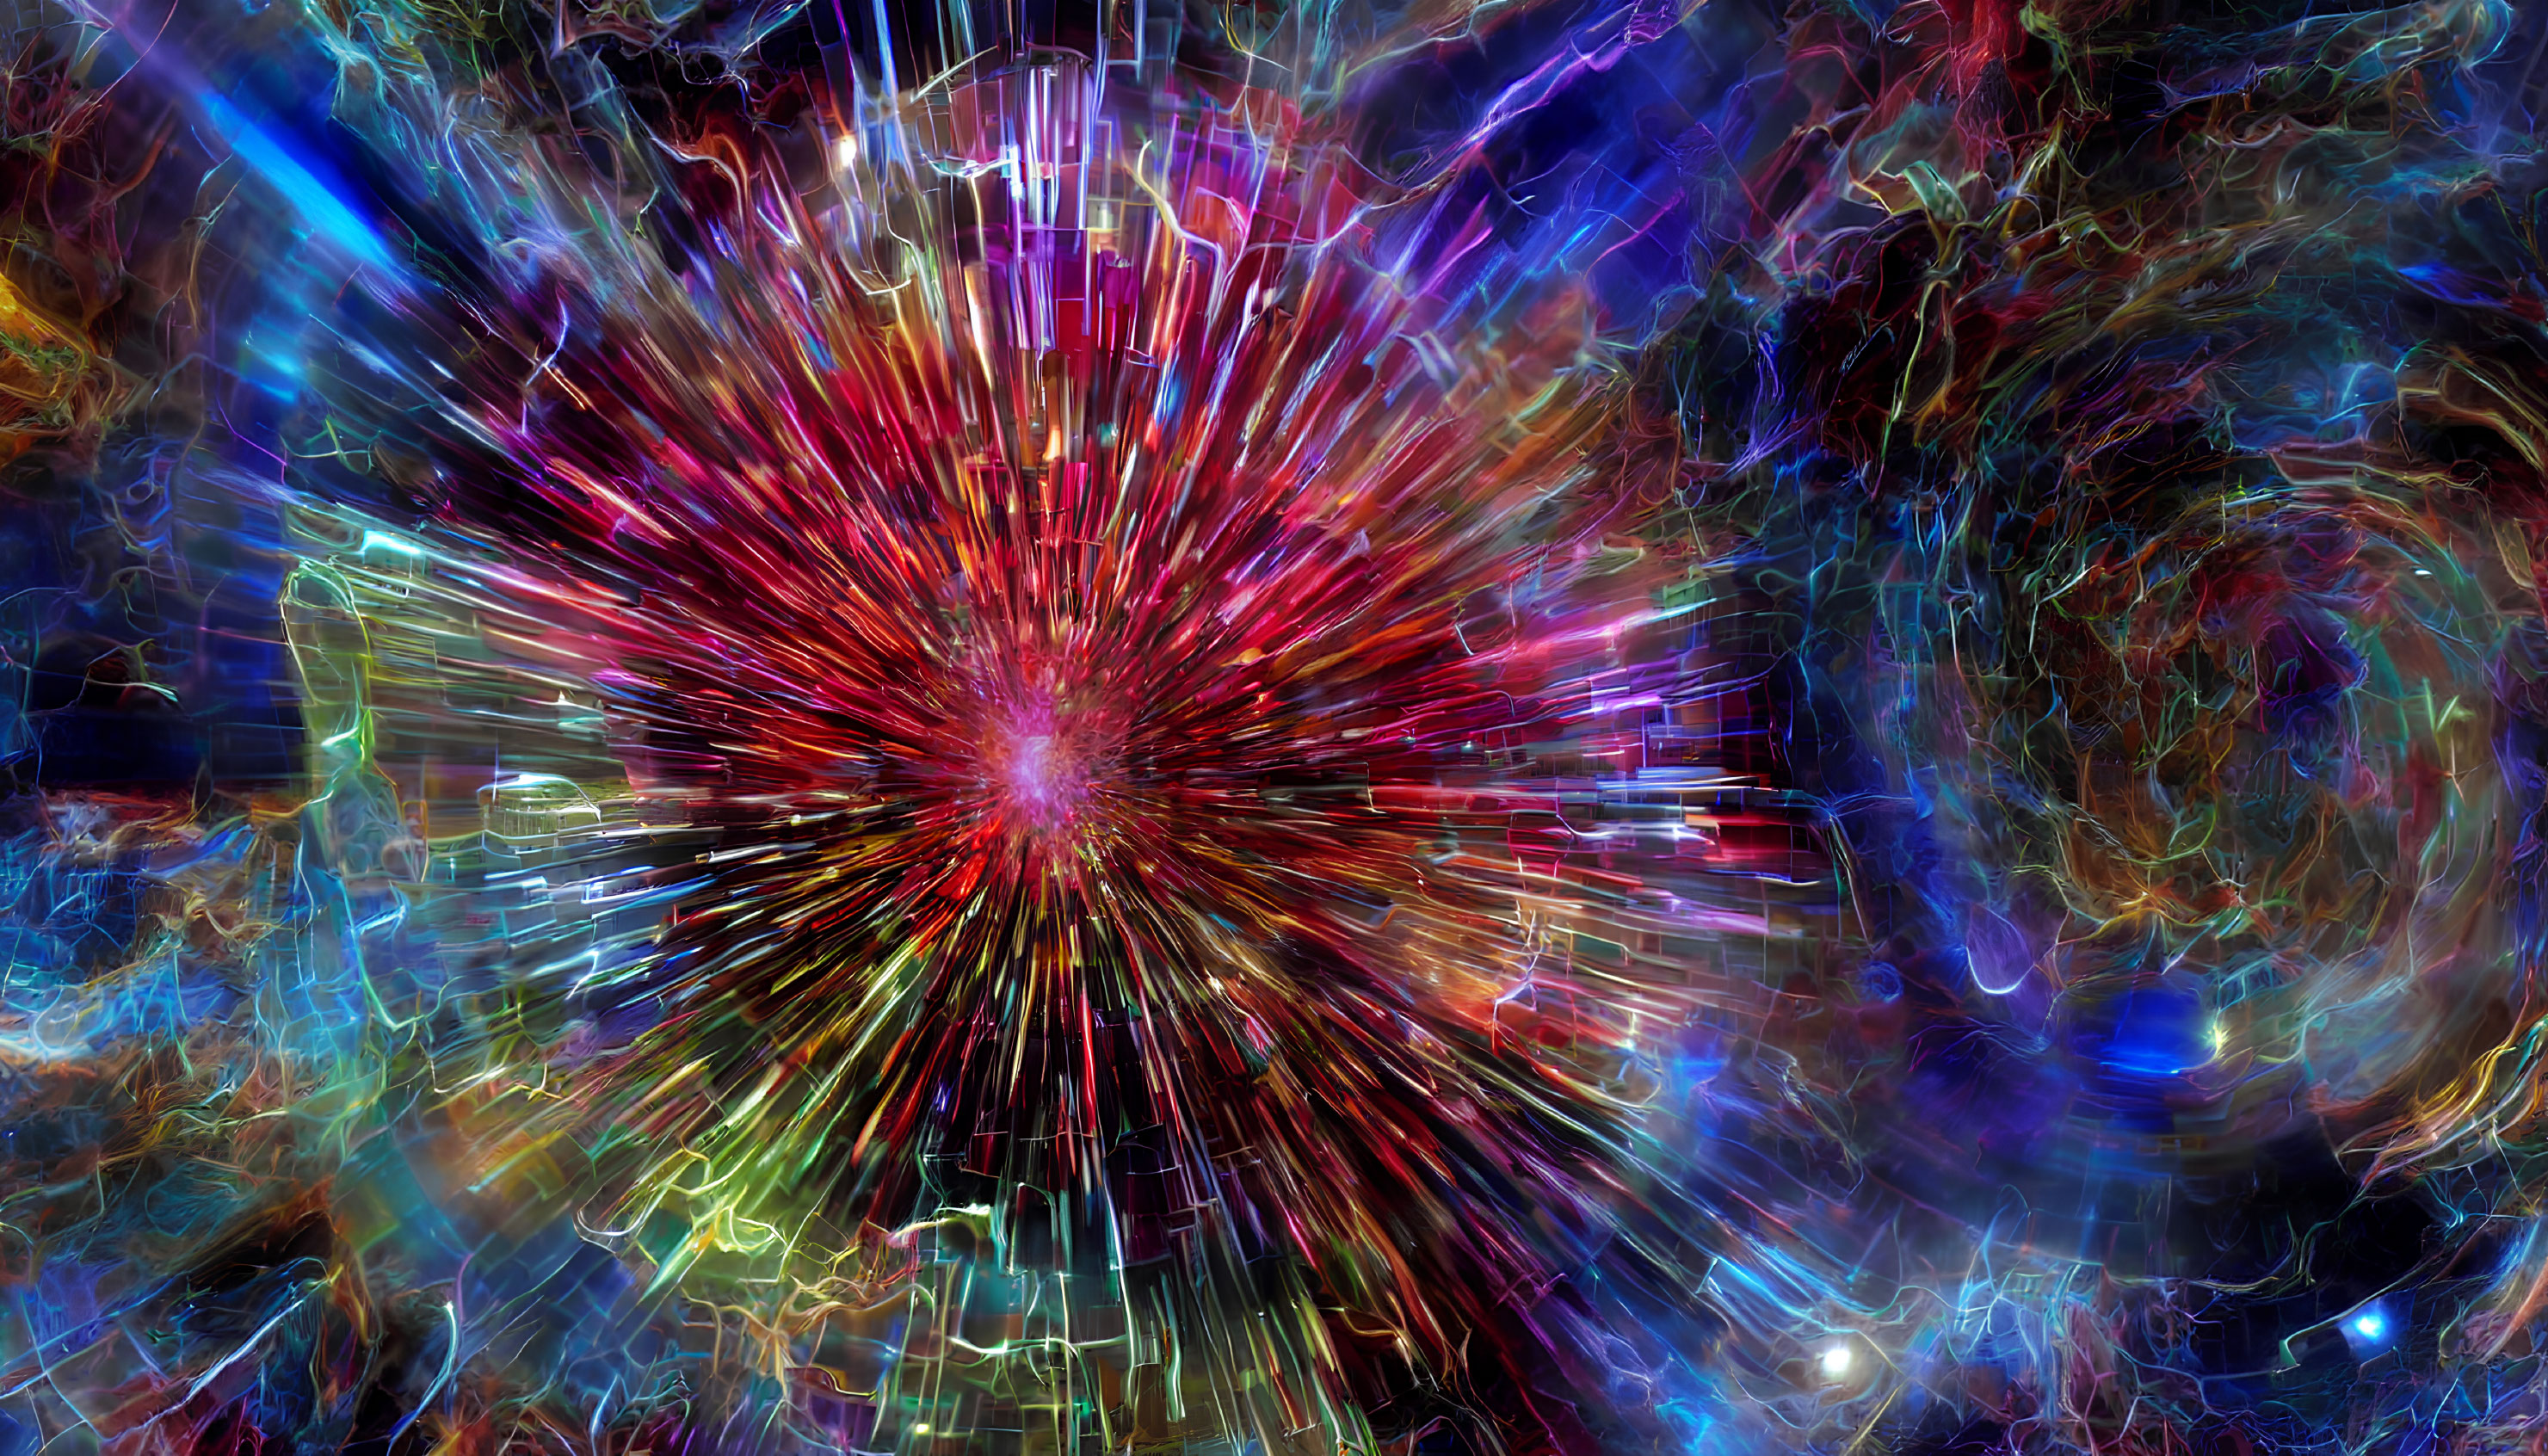 Colorful digital art: Abstract cosmic energy burst with vibrant light streams